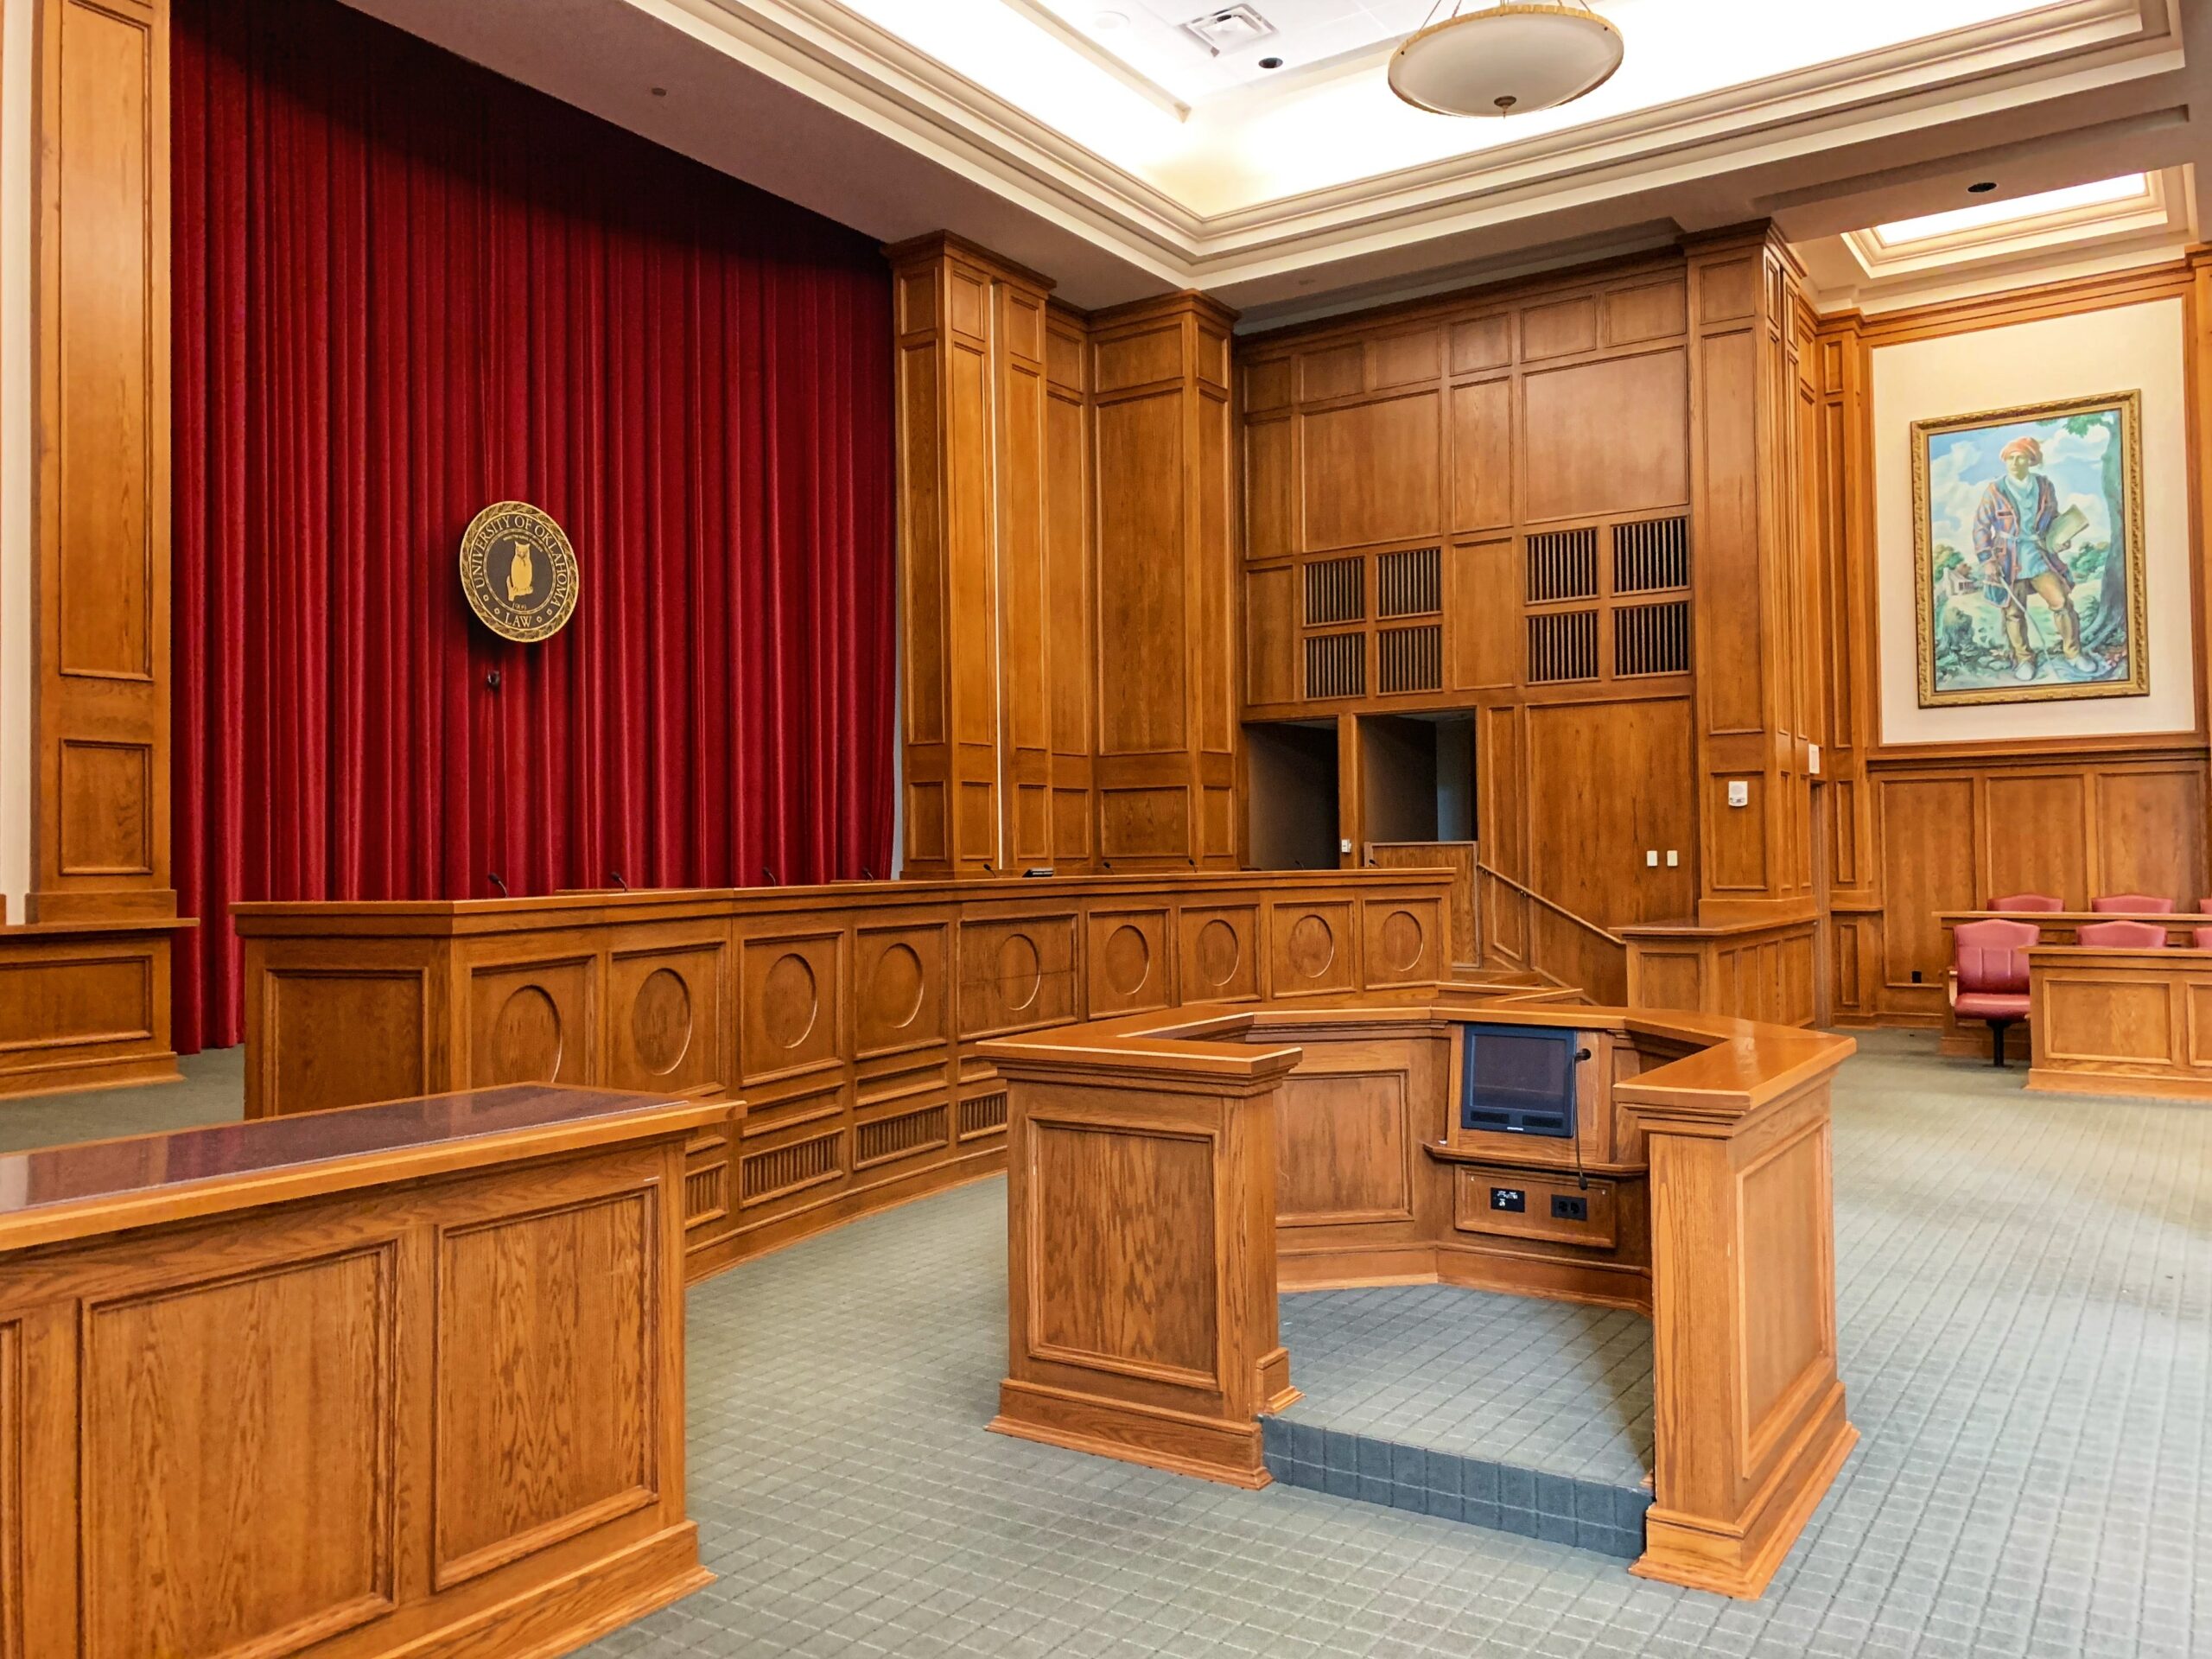 How to prepare your own cross examination in court